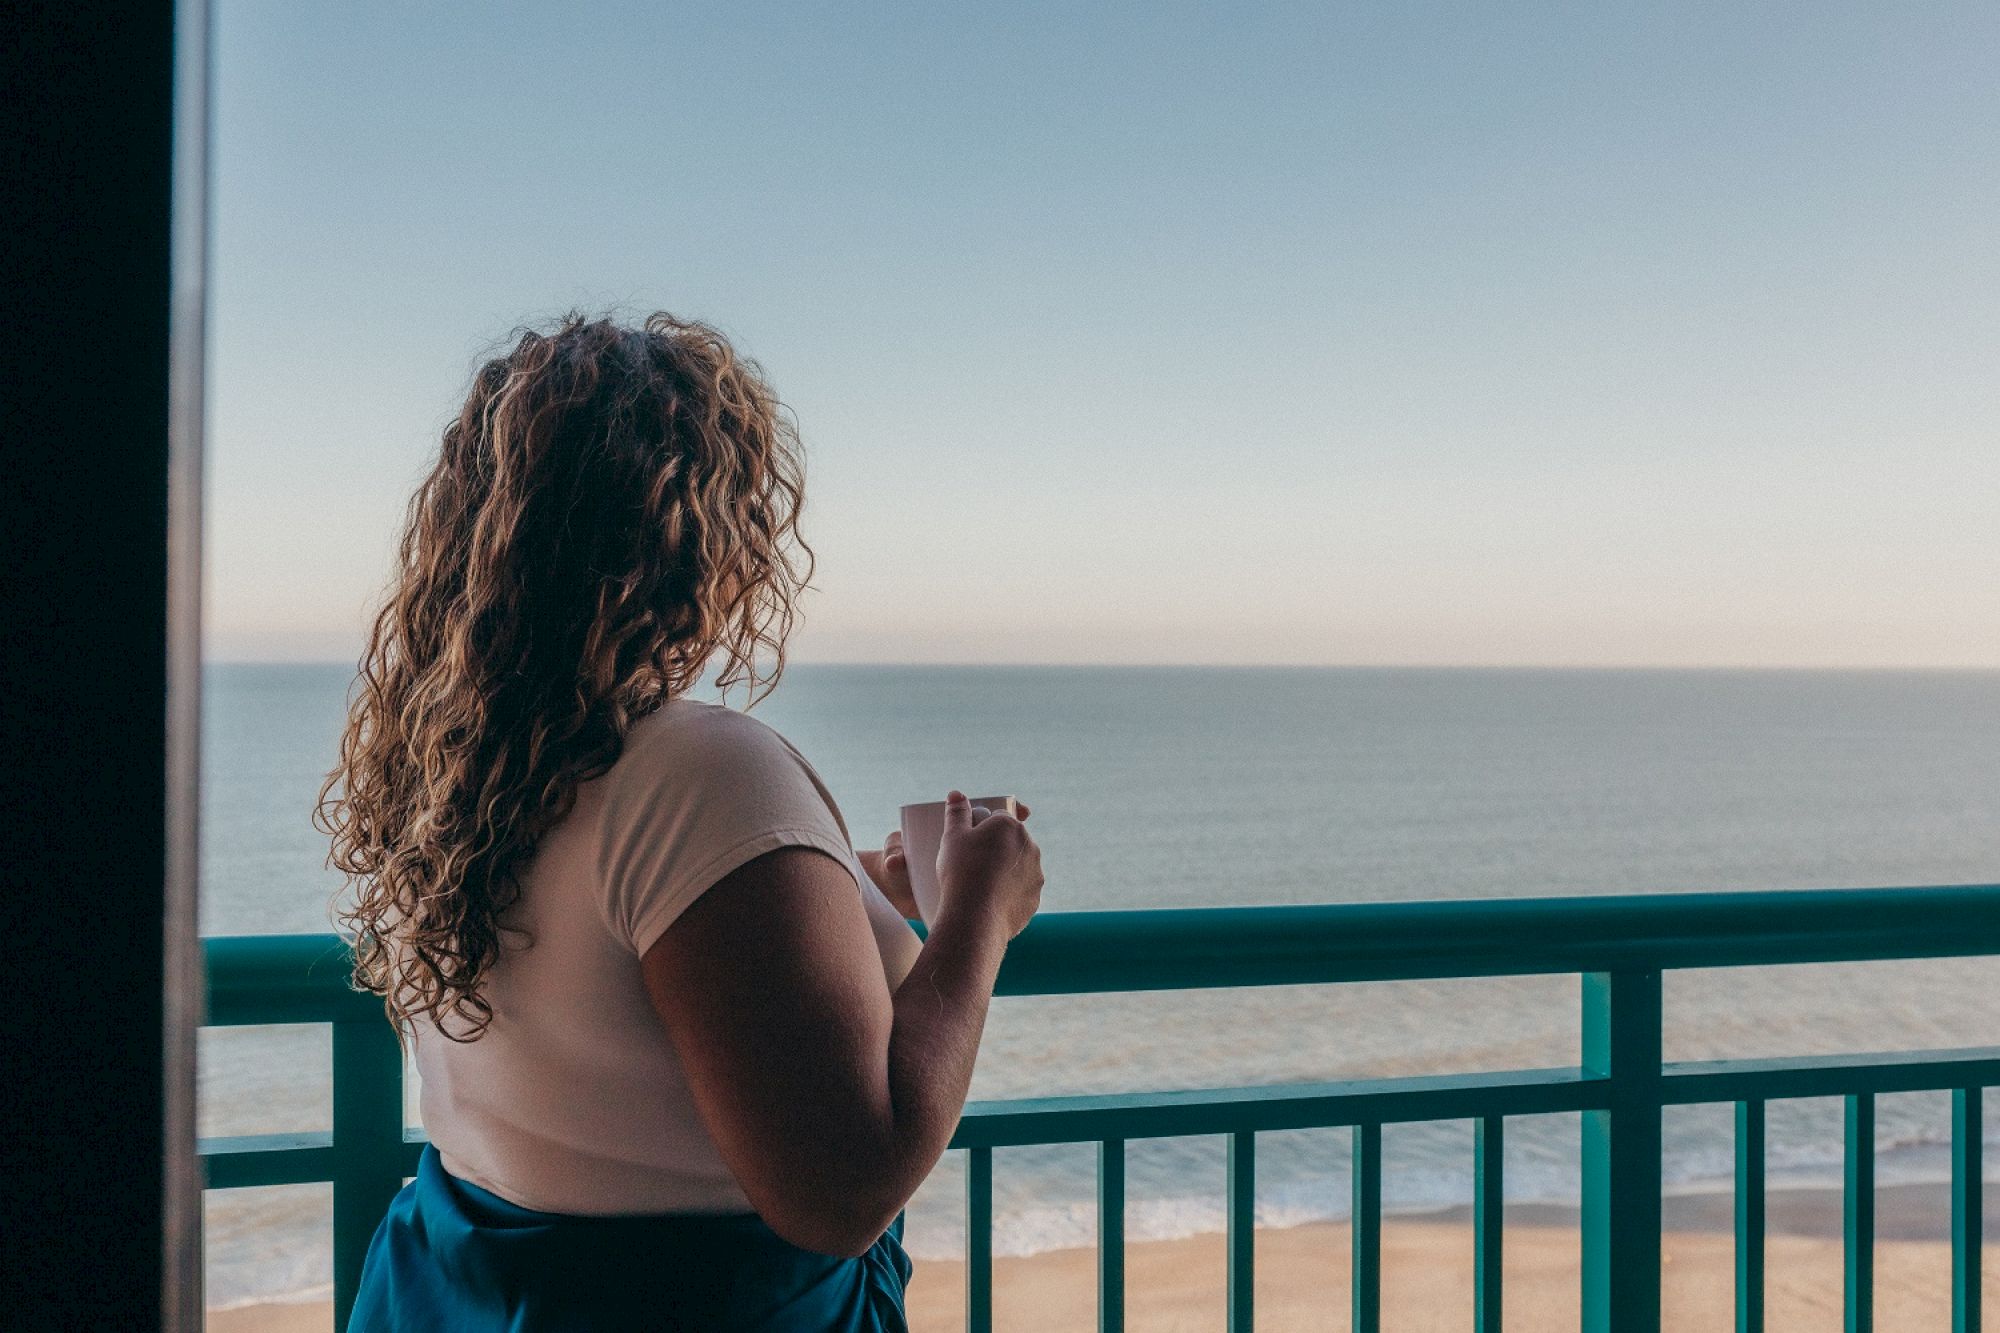 A person with curly hair stands on a balcony, gazing out at the ocean under a clear sky.